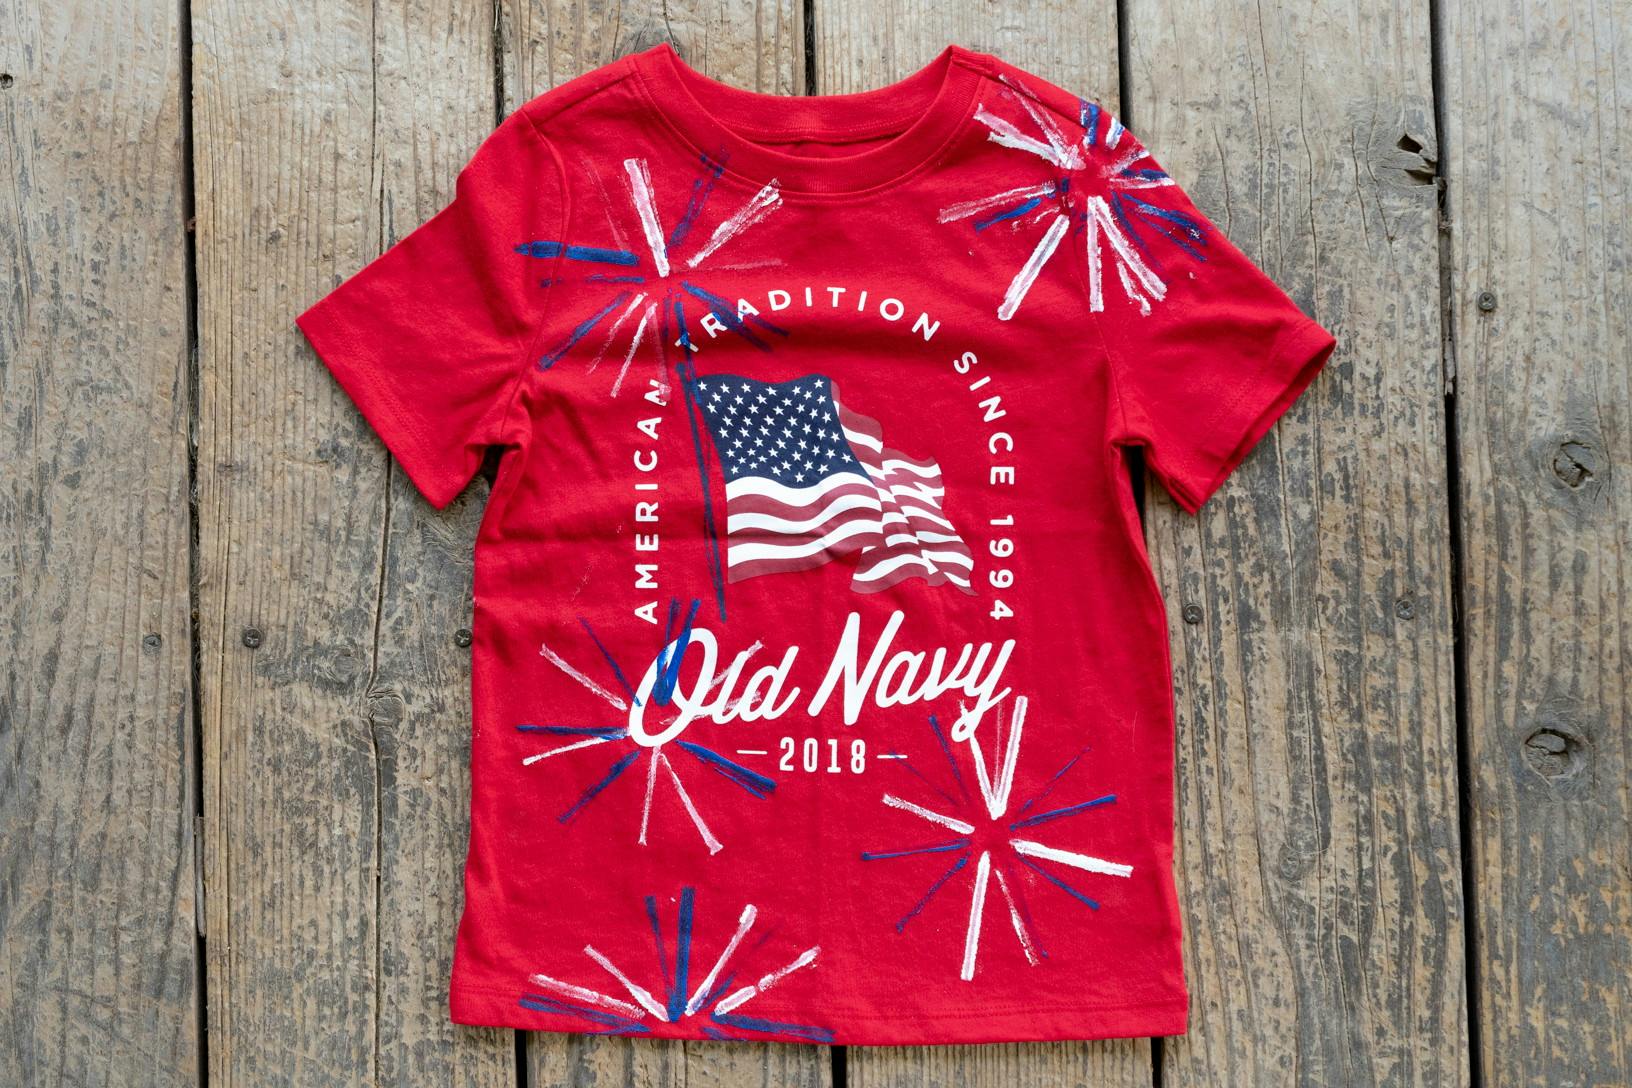 Move over Old Navy, Jane has got the best 4th of July tees this year! 😂  #linkinbio